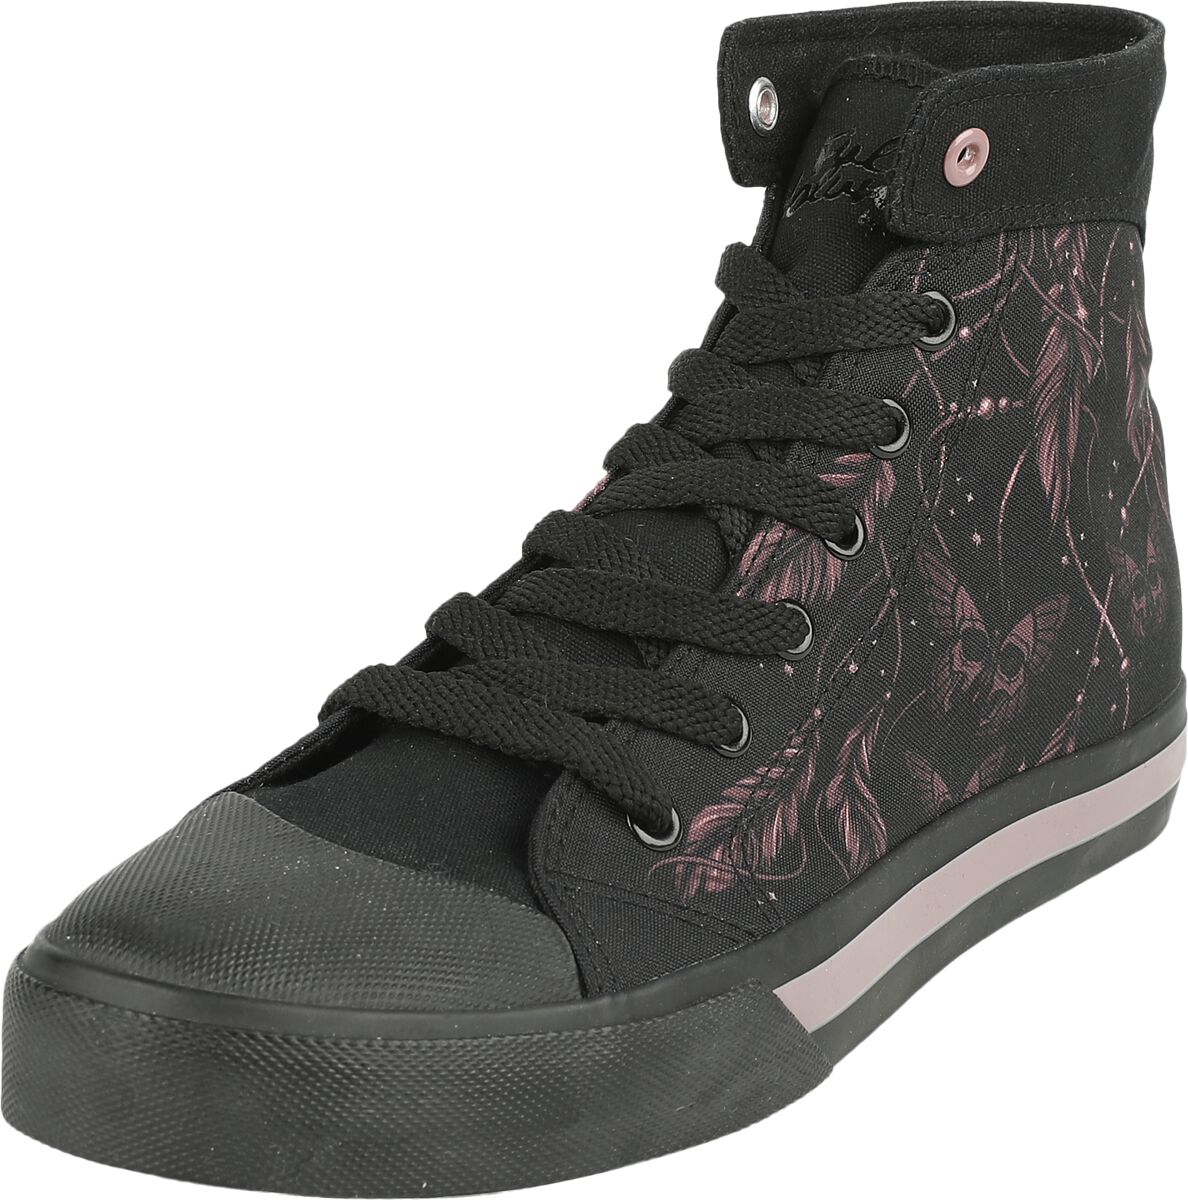 Full Volume by EMP Sneaker with Feathers and Butterflies Sneaker high schwarz in EU37